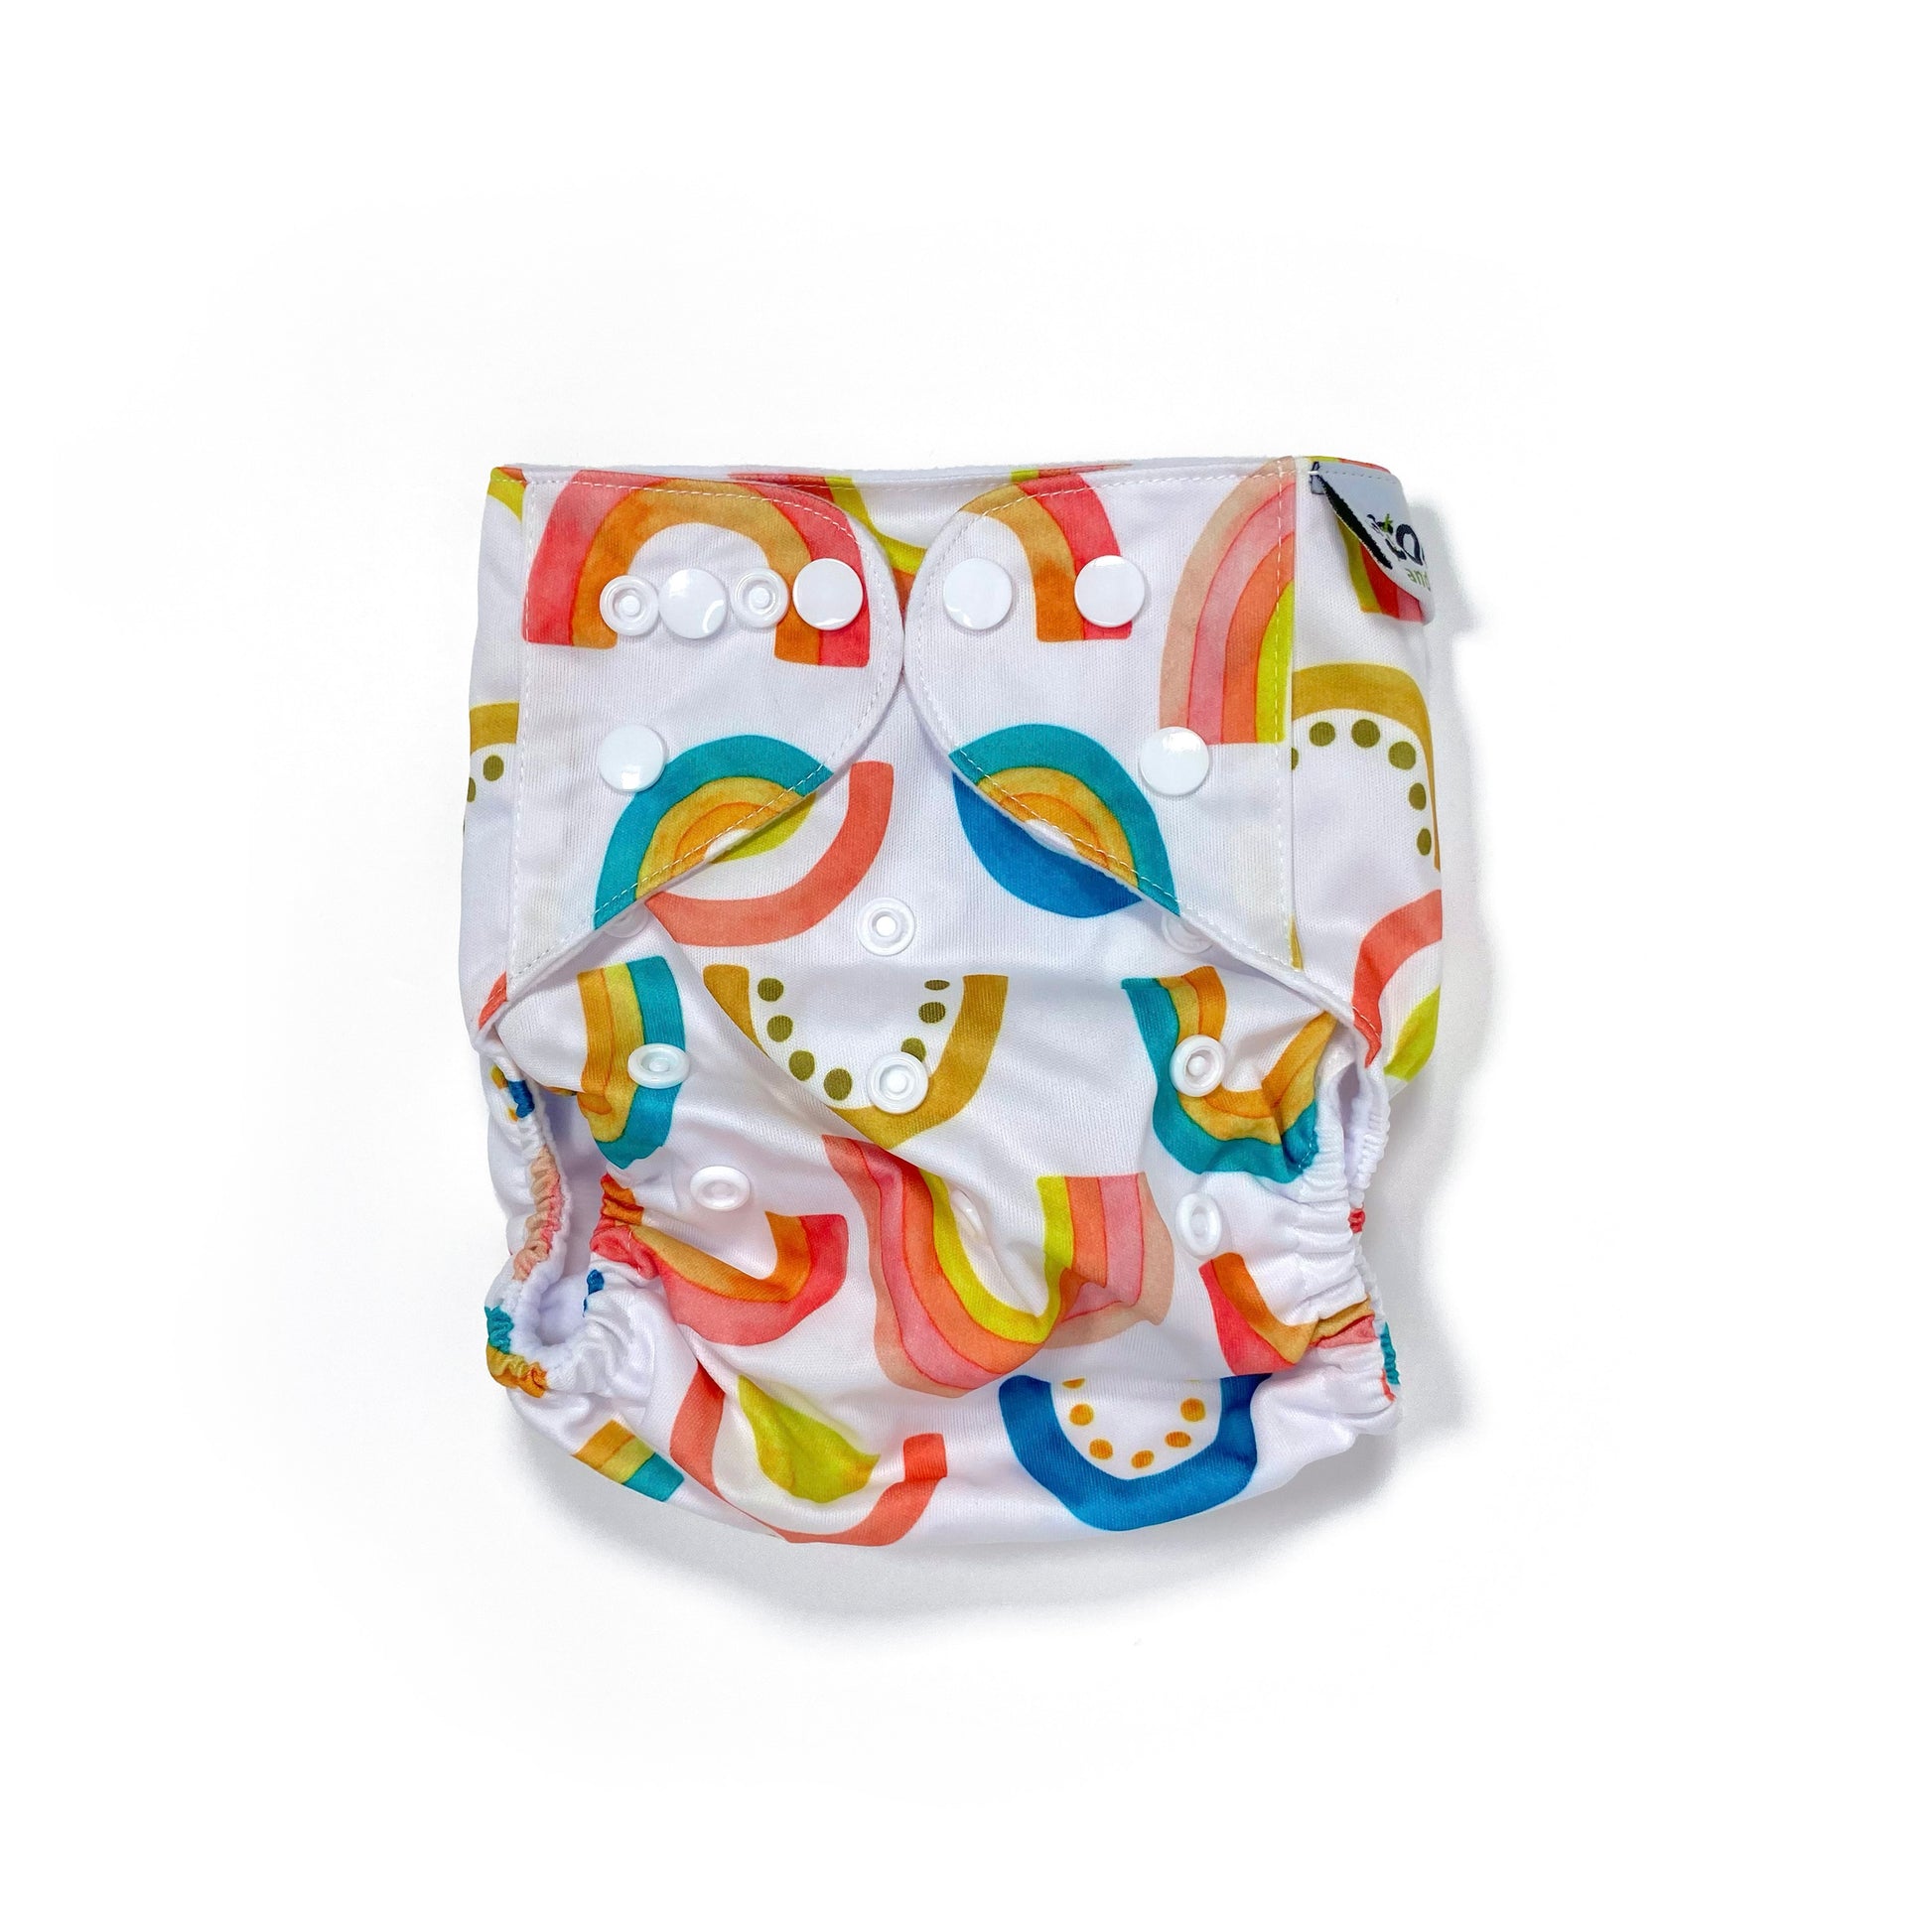 An adjustable reusable nappy for babies and toddlers, featuring a bright rainbow design, with brightly coloured rainbows on a white background. View shows the front of the nappy. 